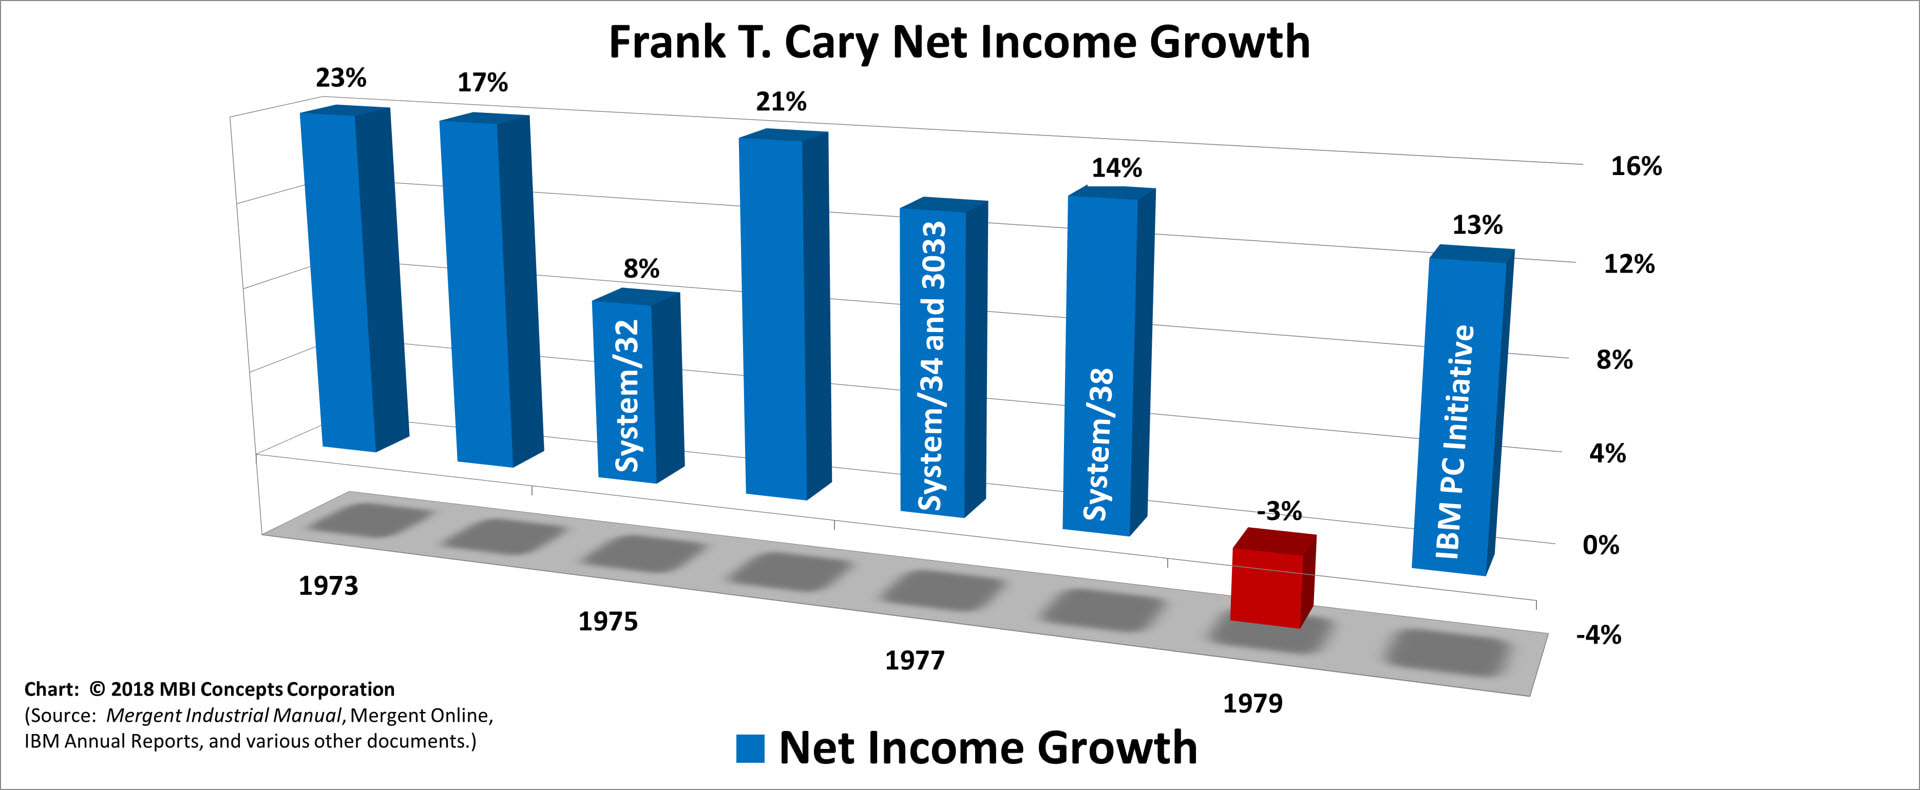 A color bar chart showing IBM's net income (profit) growth from 1973 to 1980 for Frank T. Cary.